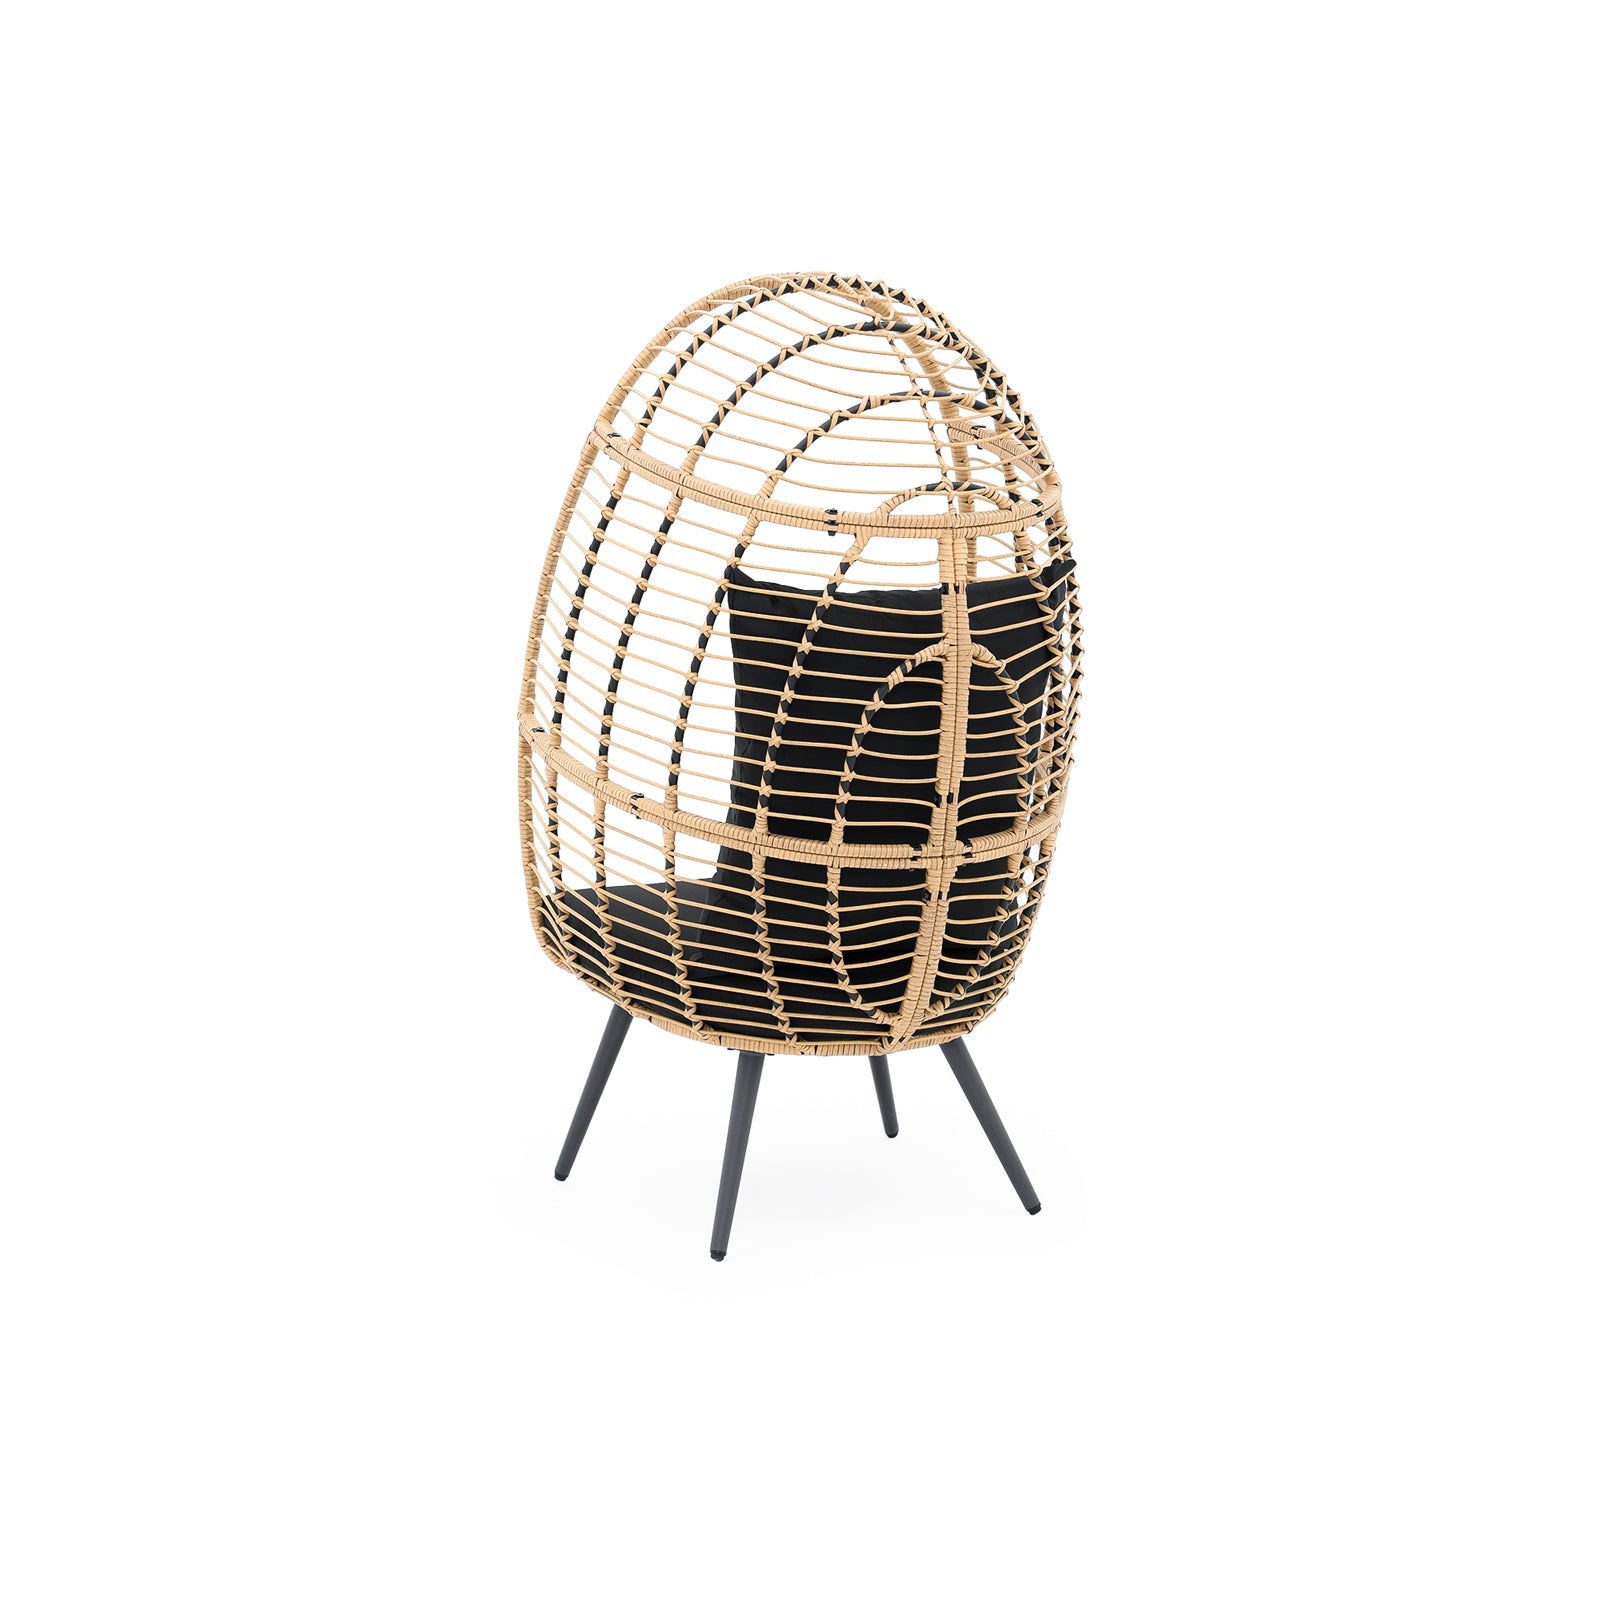 Oia Egg Chair with 4 metal legs stands, Natural Rattan Design, black seat and back cushions, back view - Jardina FurnitureColor_Black